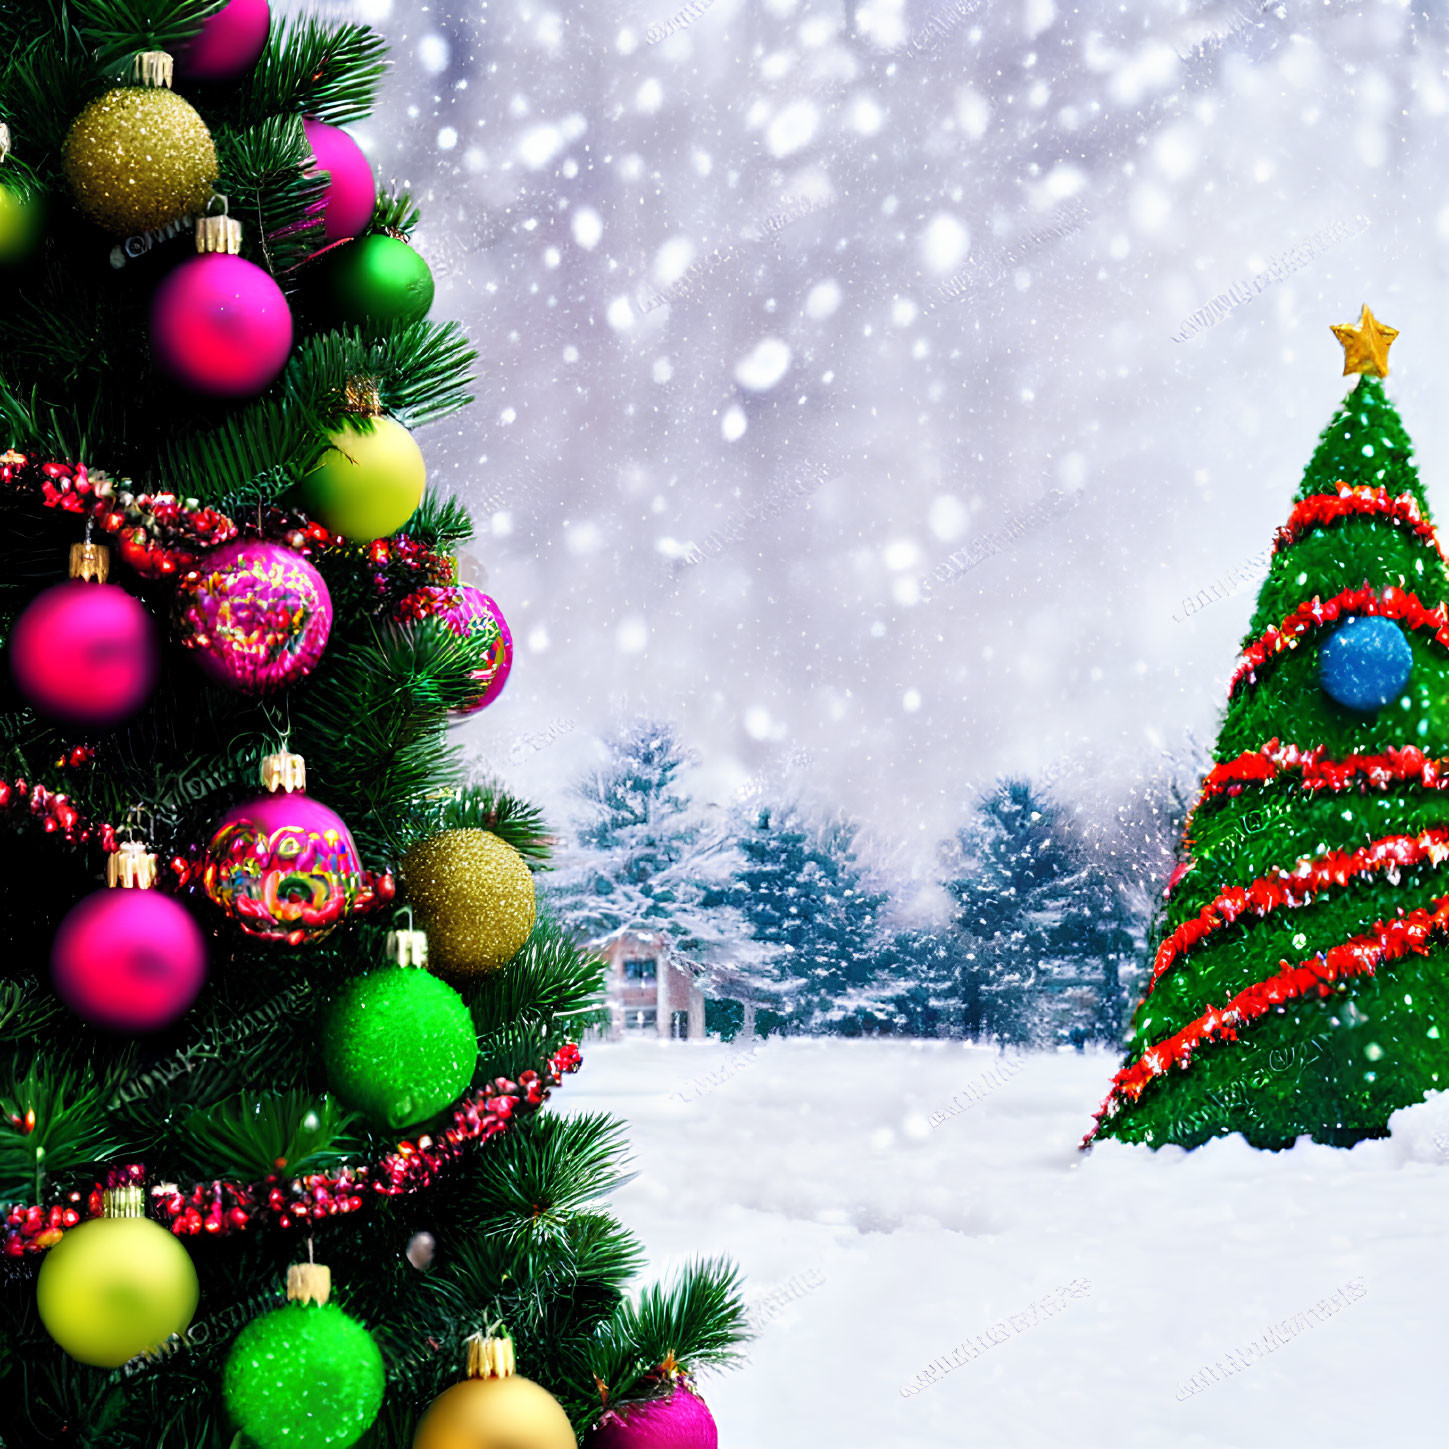 Colorful Ornaments on Vibrant Christmas Tree in Snowy Wintry Scene